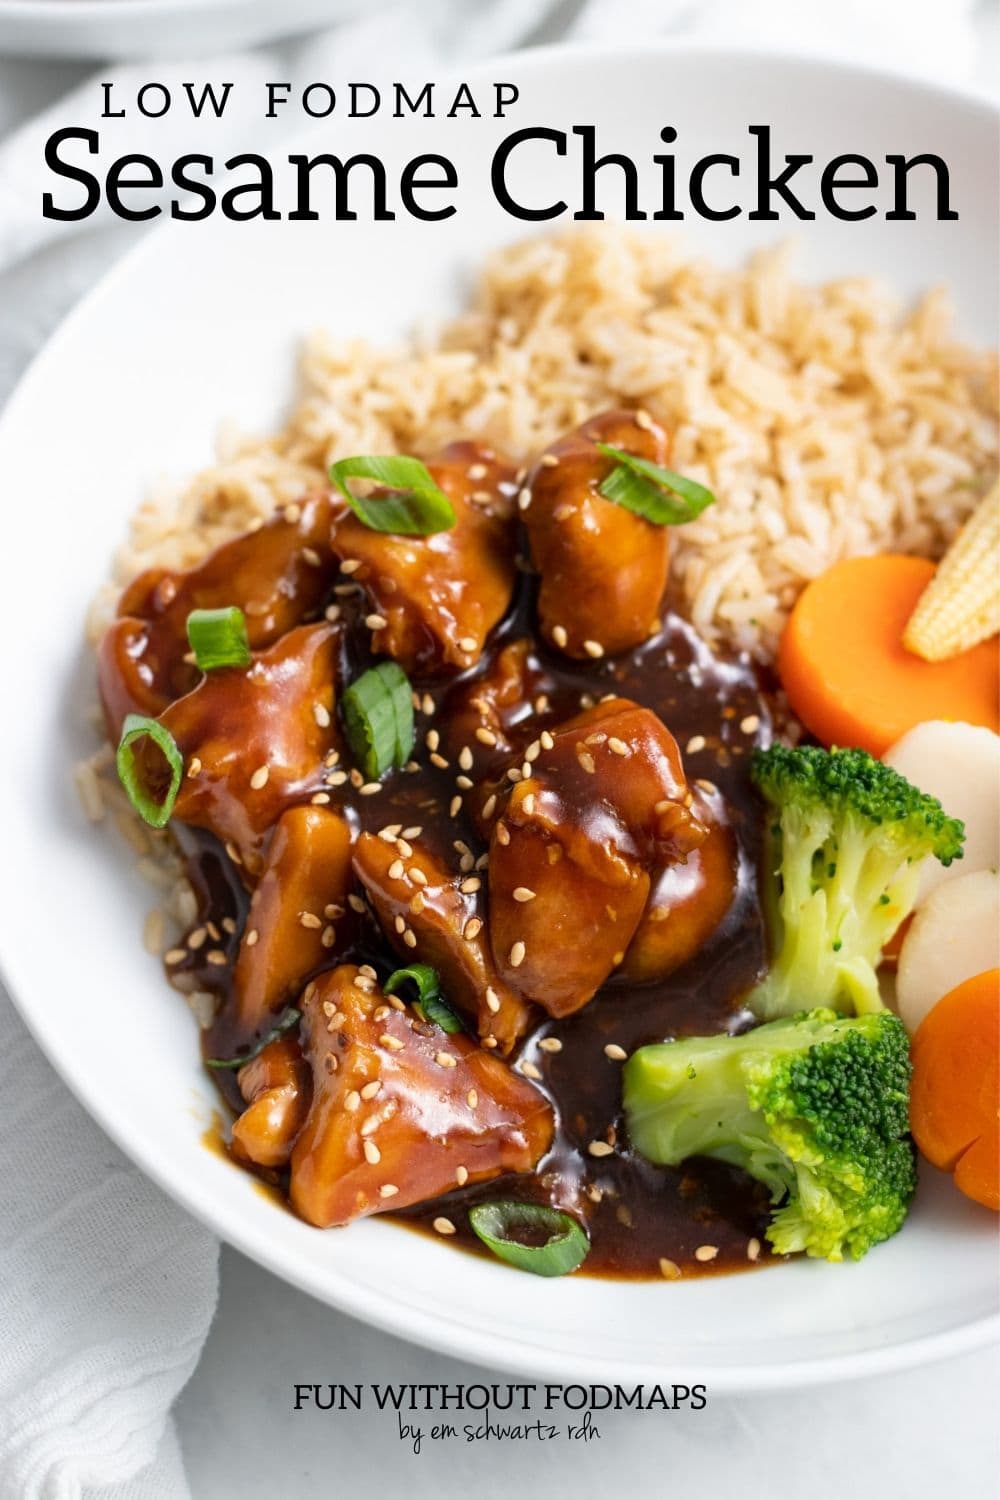 A bowl of low FODMAP sesame chicken, steamed mixed veggies, and brown rice. A black text overlay above it reads "Low FODMAP Sesame Chicken."